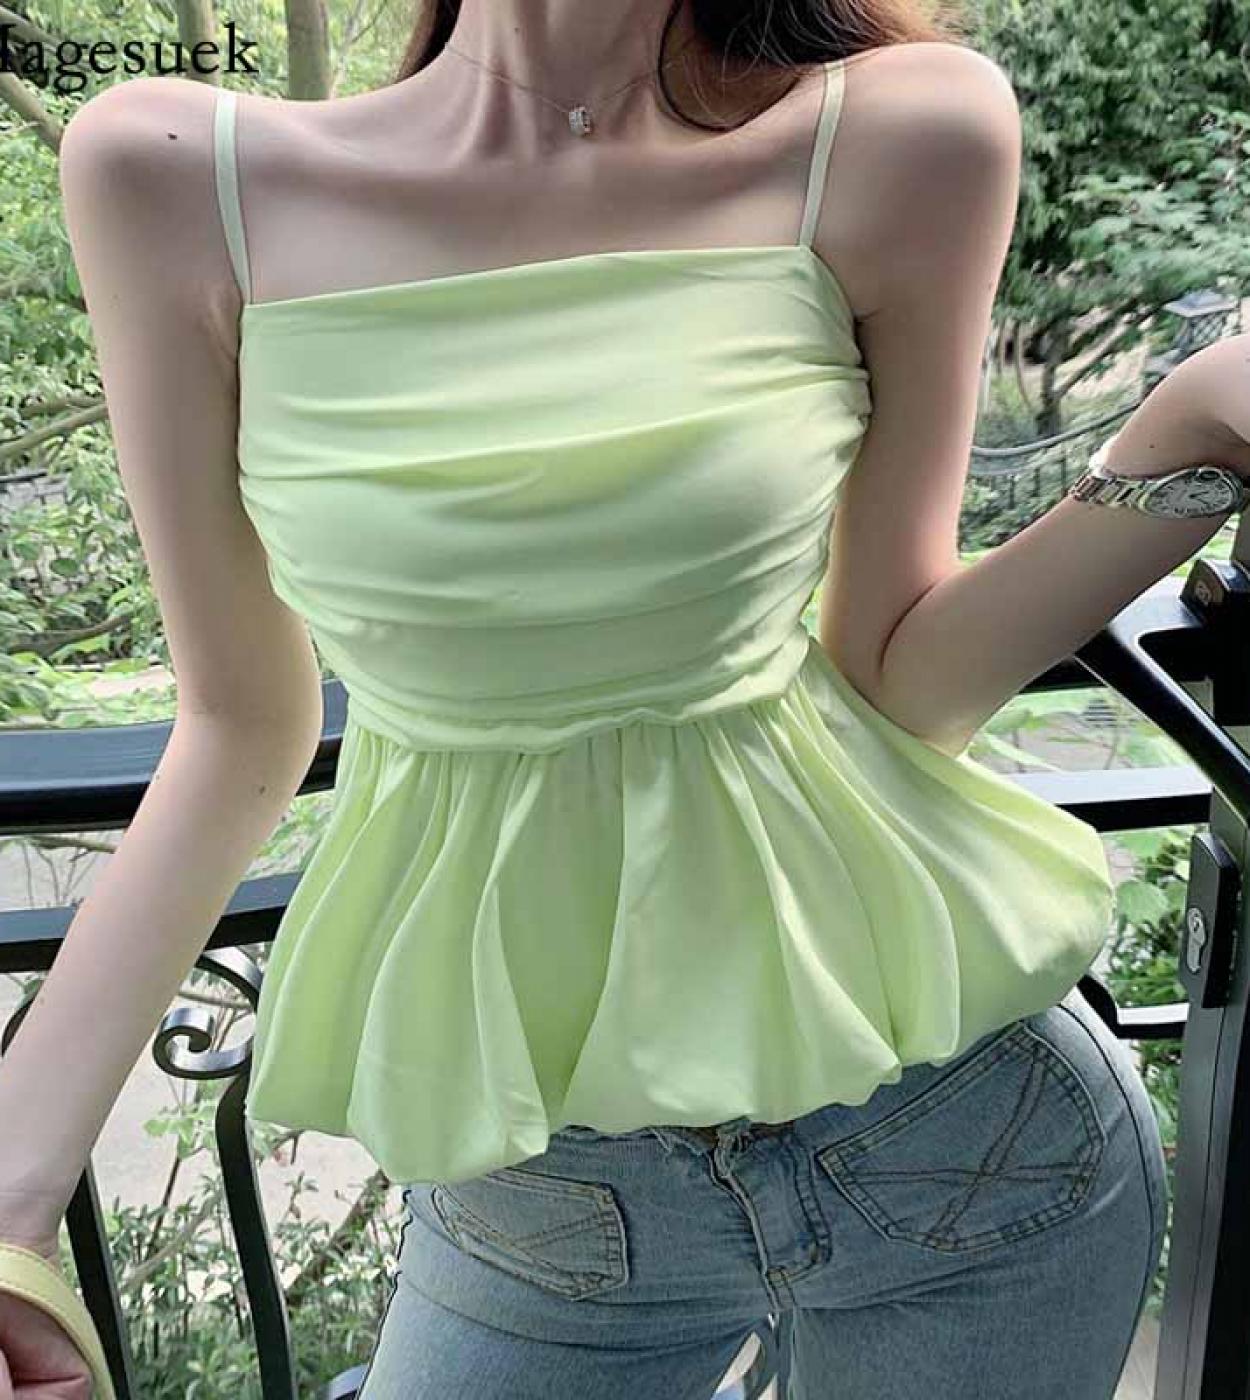  Slim Super Short Female Shirts Green Tank Top Summer Top Female Solid Color Crop Top Women  Clothing Ropa Mujer 10184ca